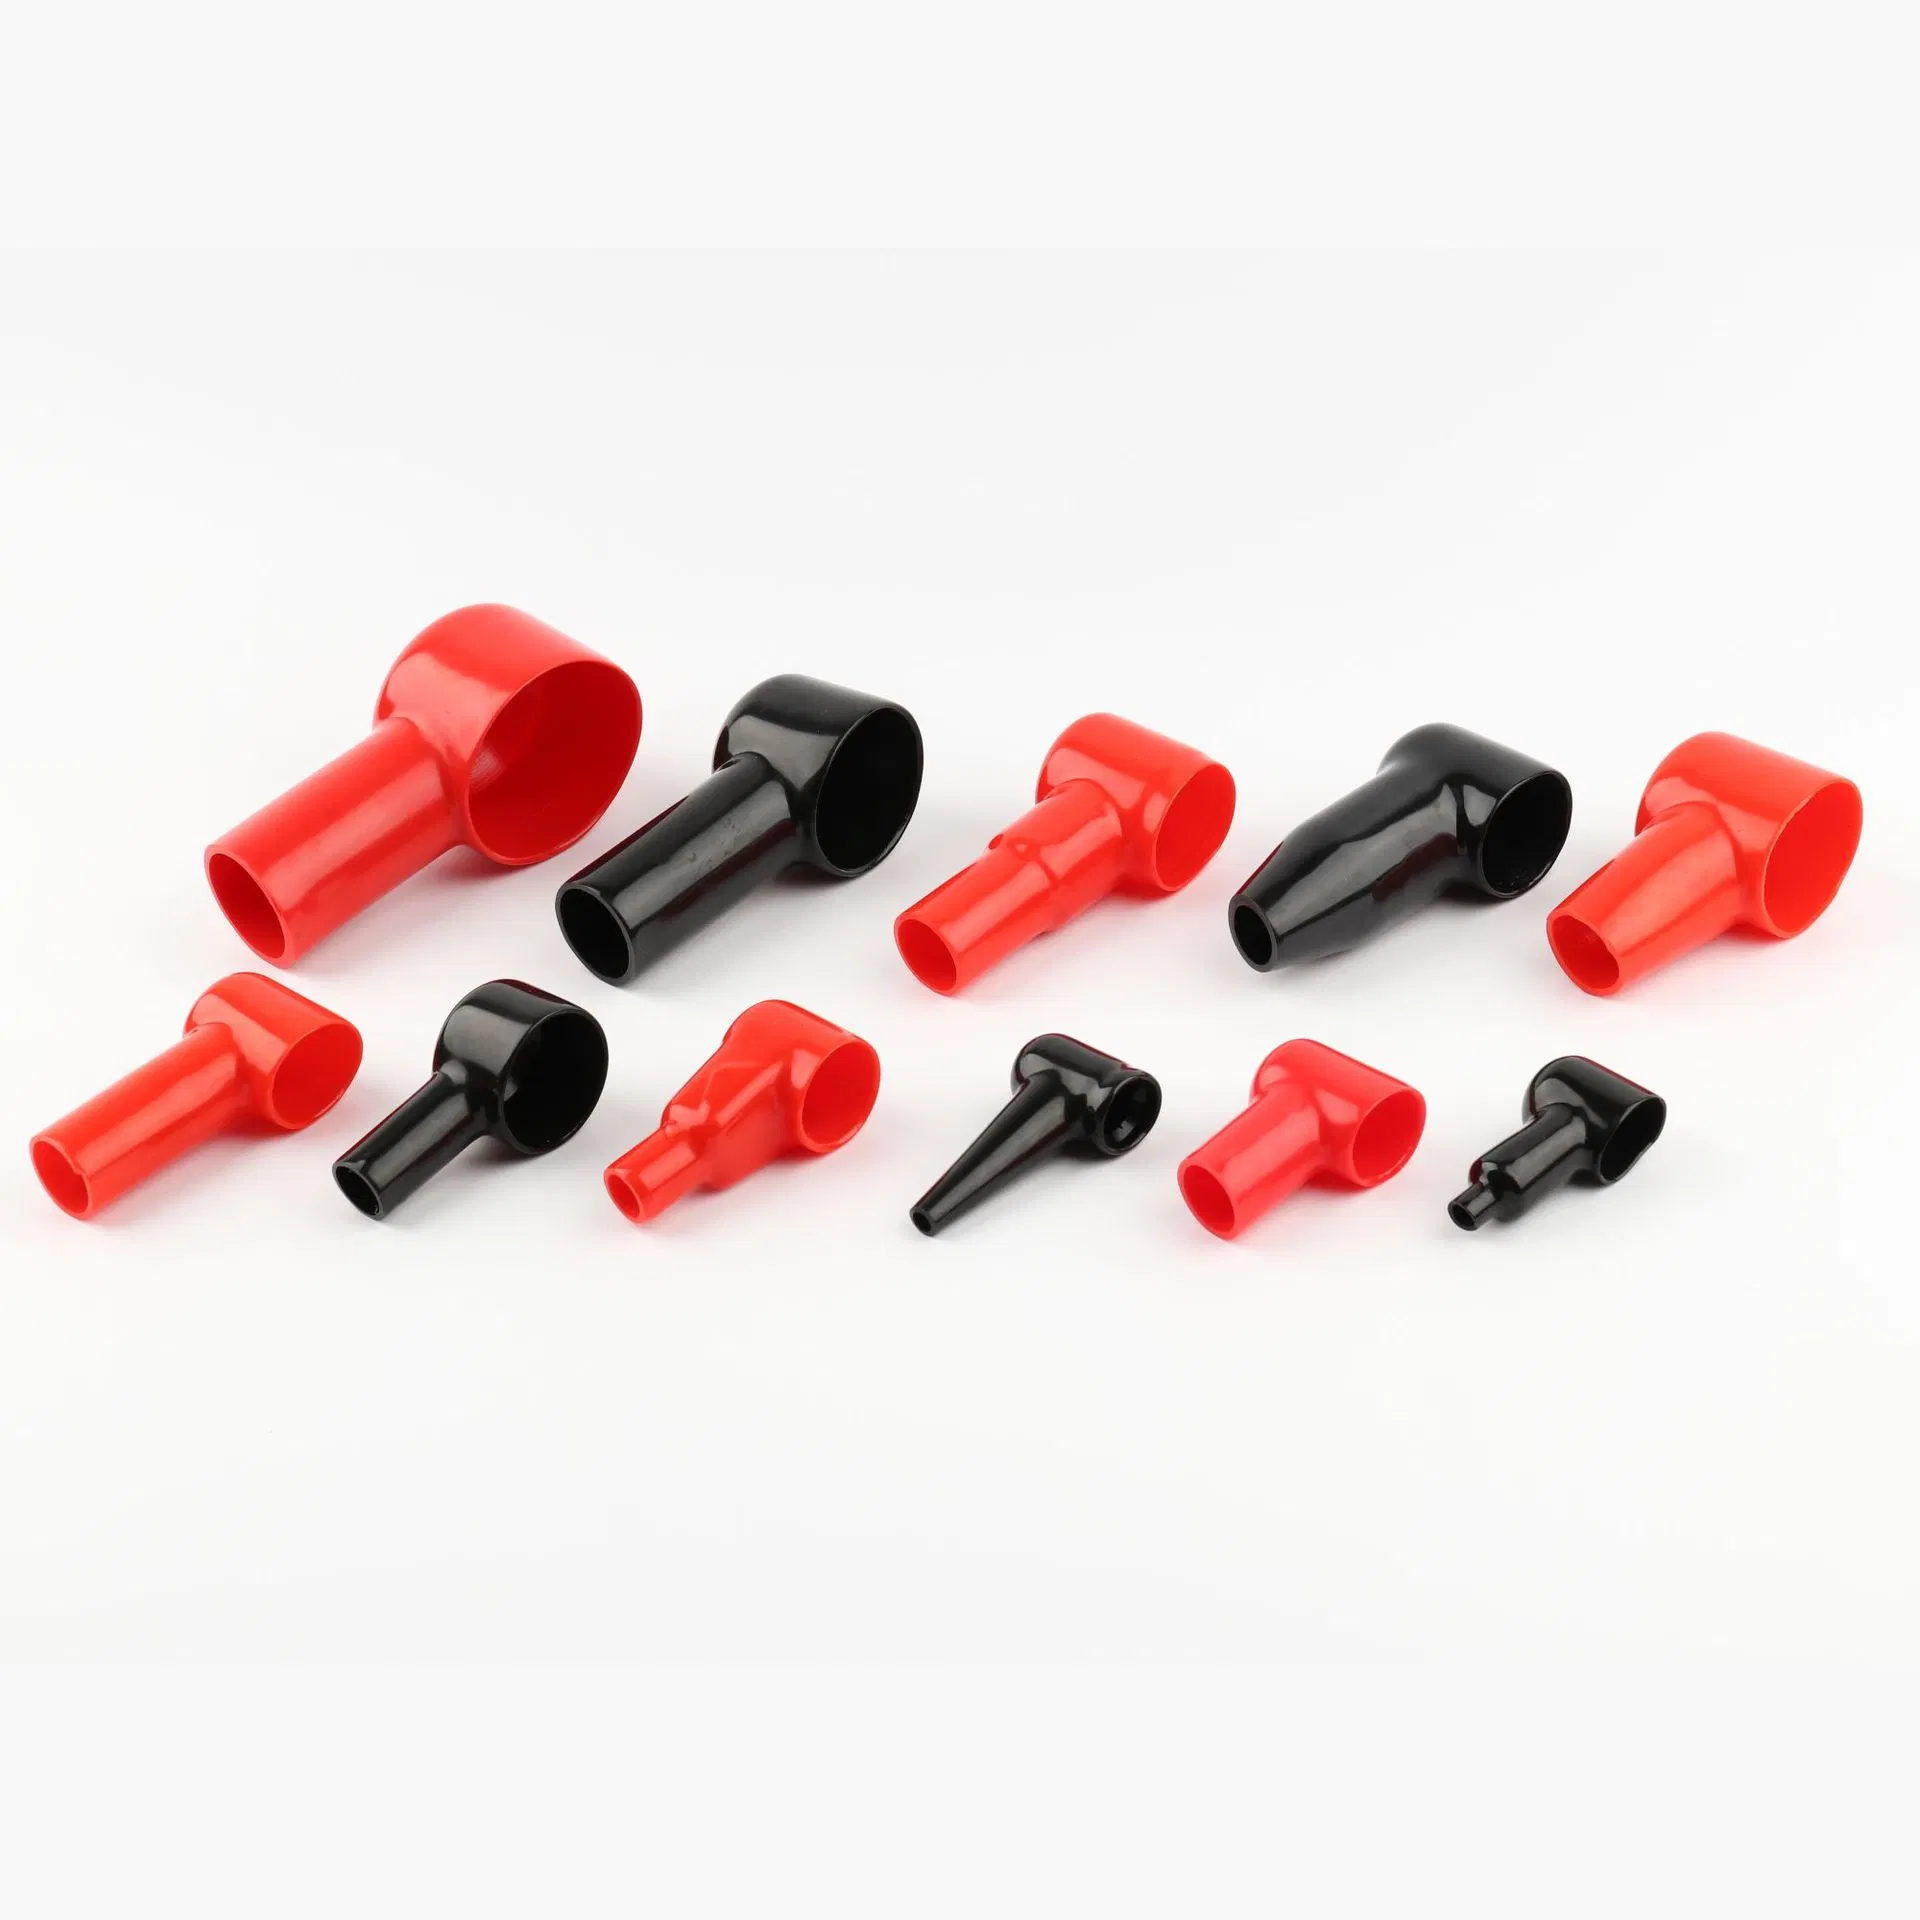 8mm2 -25mm2 Rubber Cable End Caps PVC Cable Lug Boot Plastic Cable Terminal Cover for Motorcycle Battery Wire L10-14-45